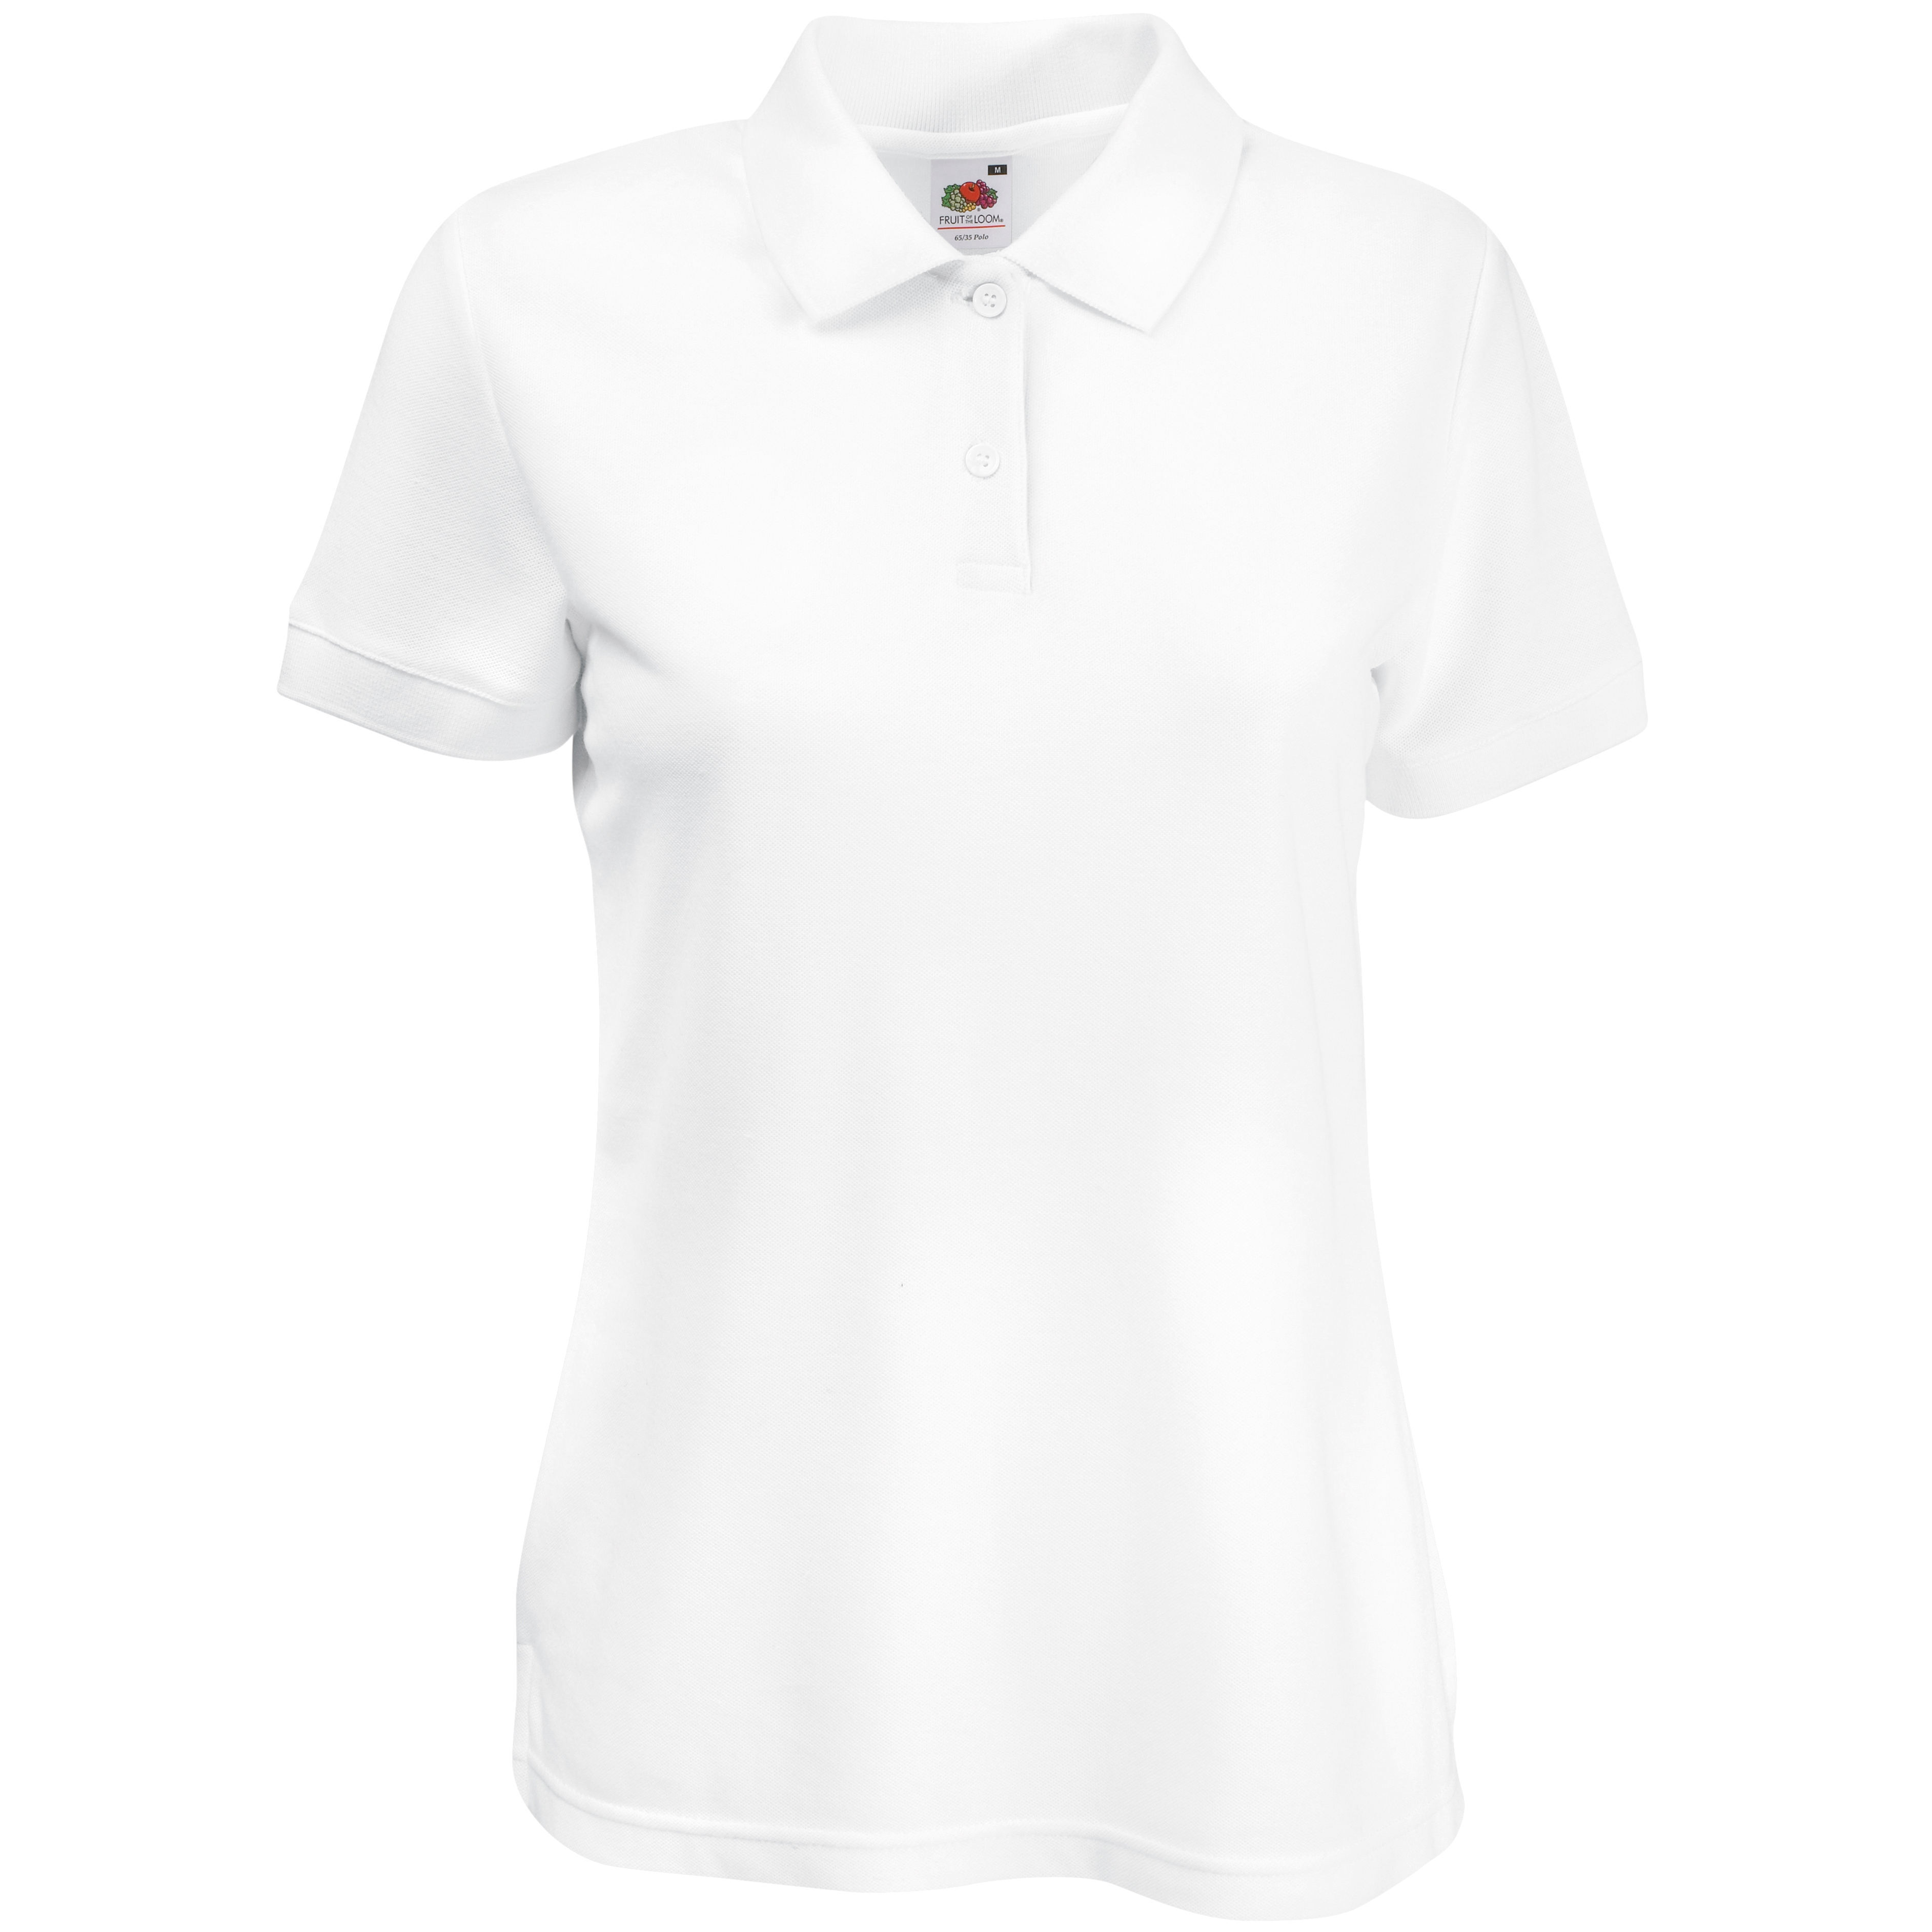 ax-httpswebsystems.s3.amazonaws.comtmp_for_downloadfruit-of-the-loom-ladies-65-35-polo-white.jpg